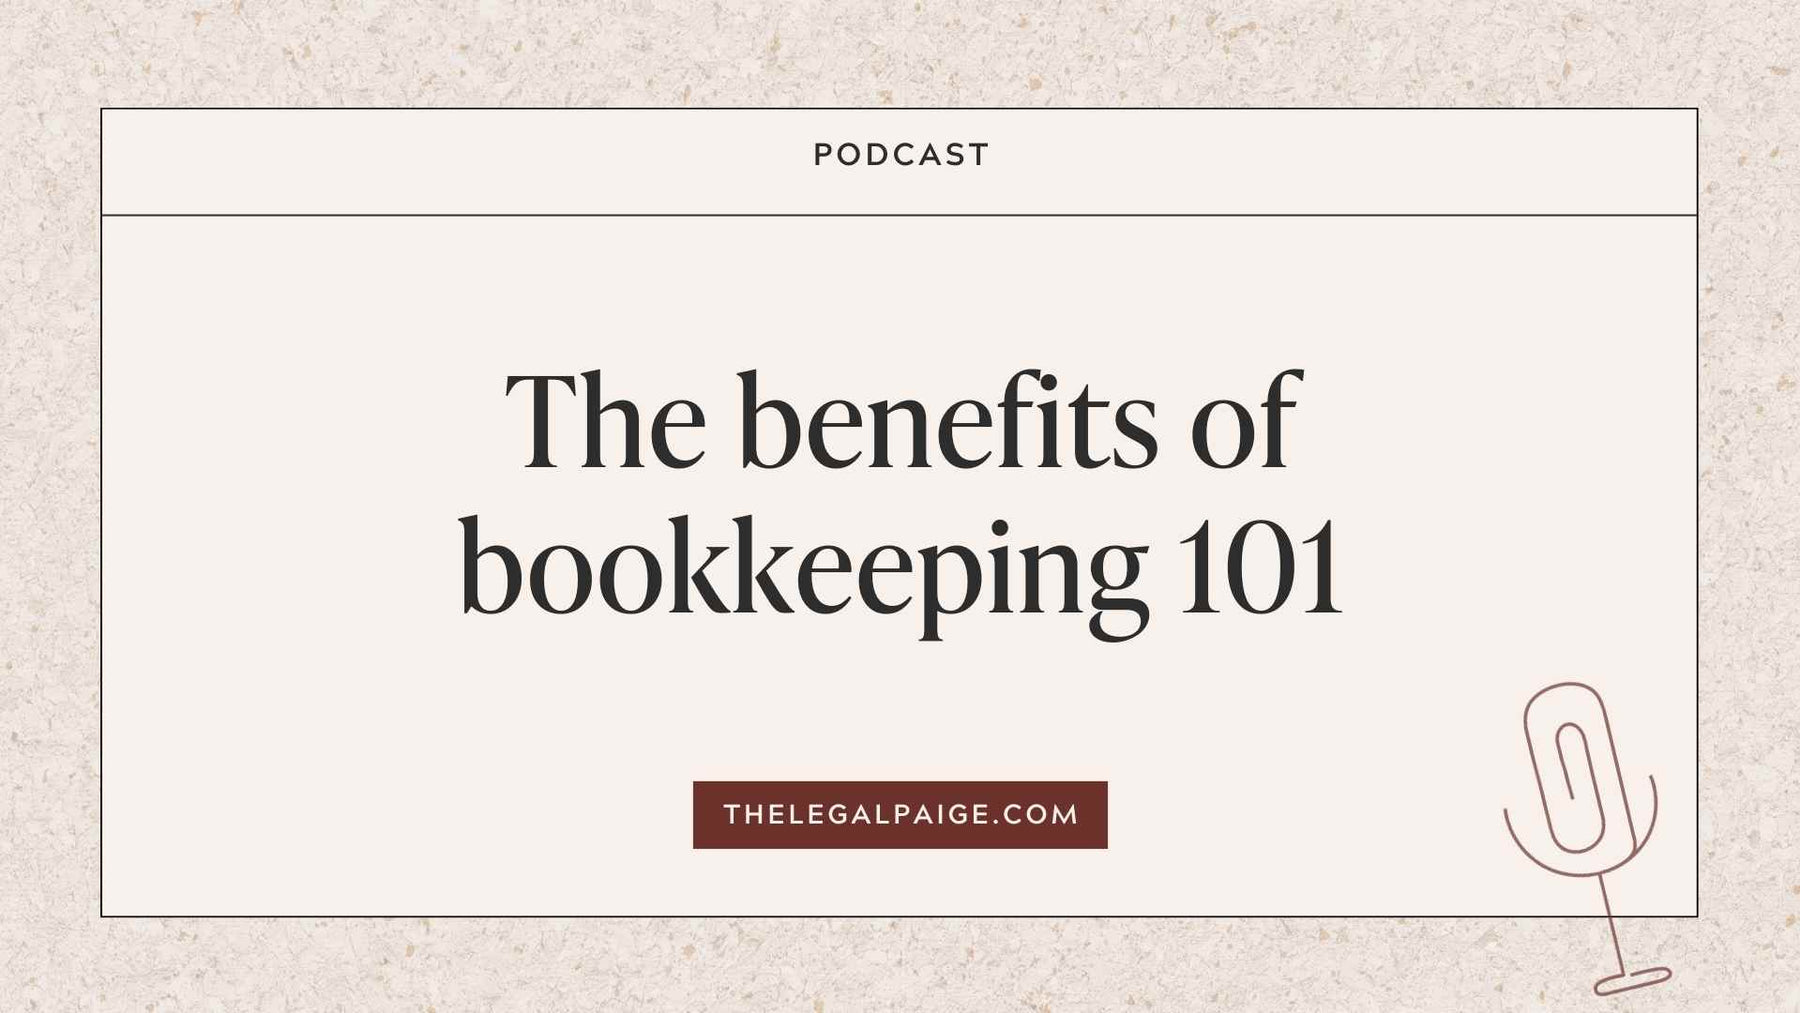 Episode 23: The benefits of bookkeeping 101